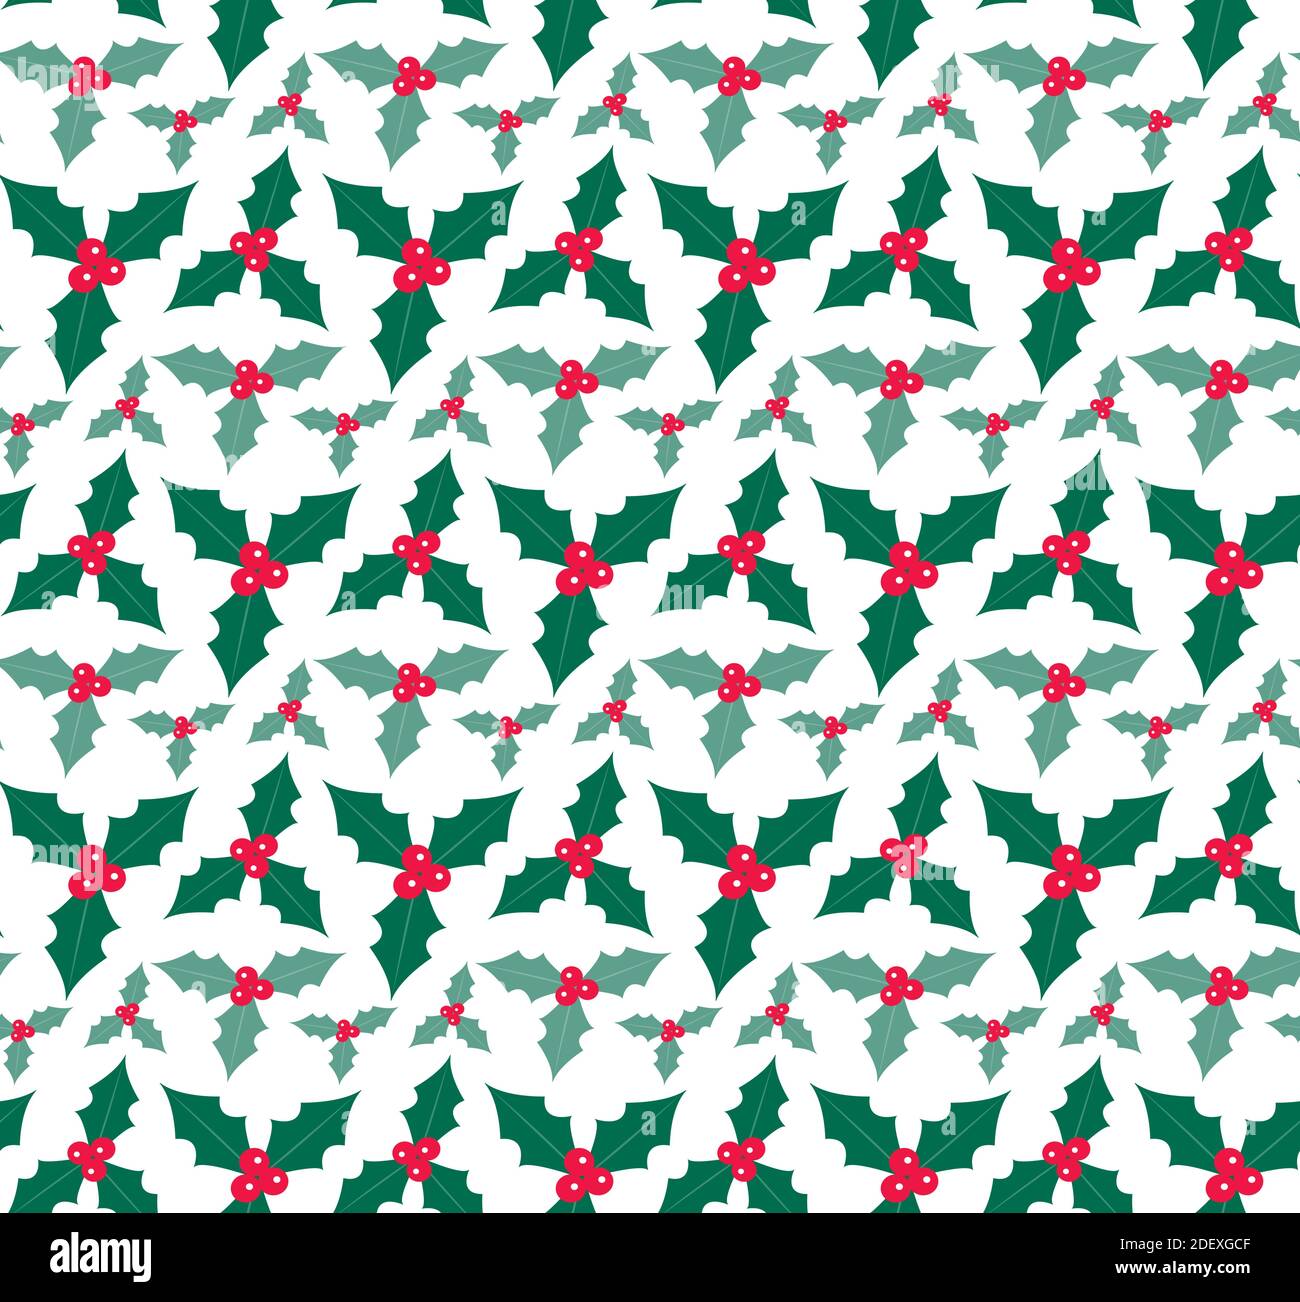 Christmas plants seamless pattern. Merry christmas repeating texture winter flowers.Tileable Holiday background. Vecto illustration Stock Vector